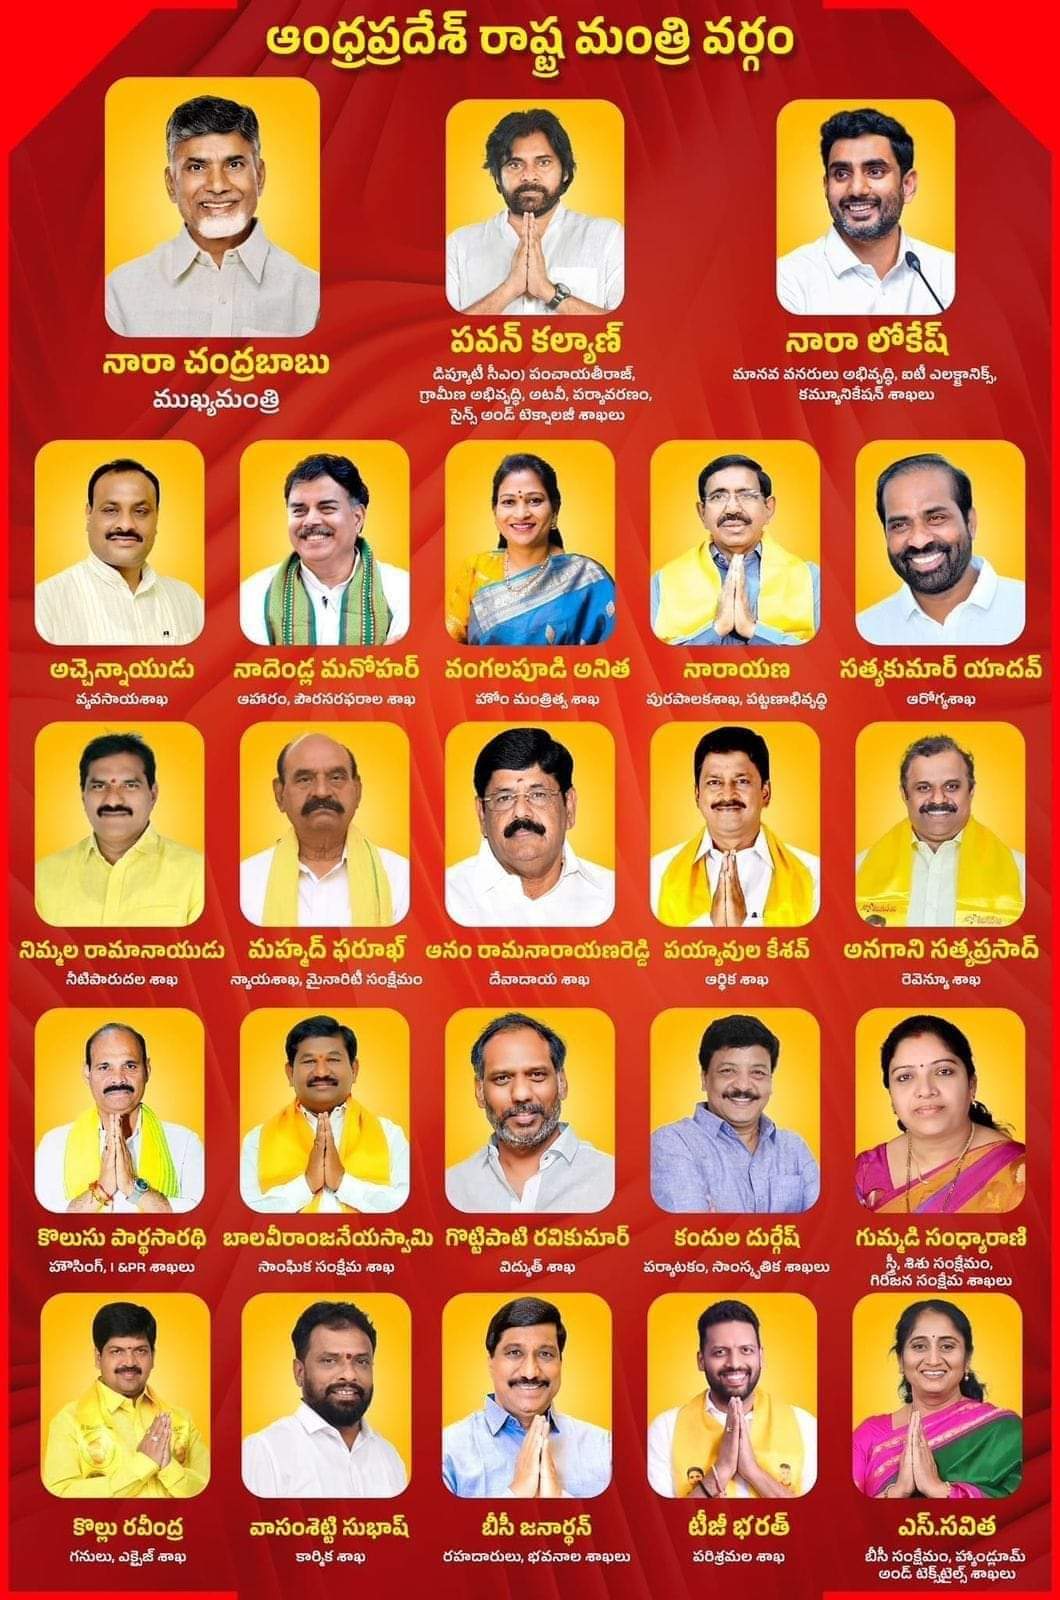 The Chief Minister N Chandrababu Naidu has announced the departments for the new cabinet